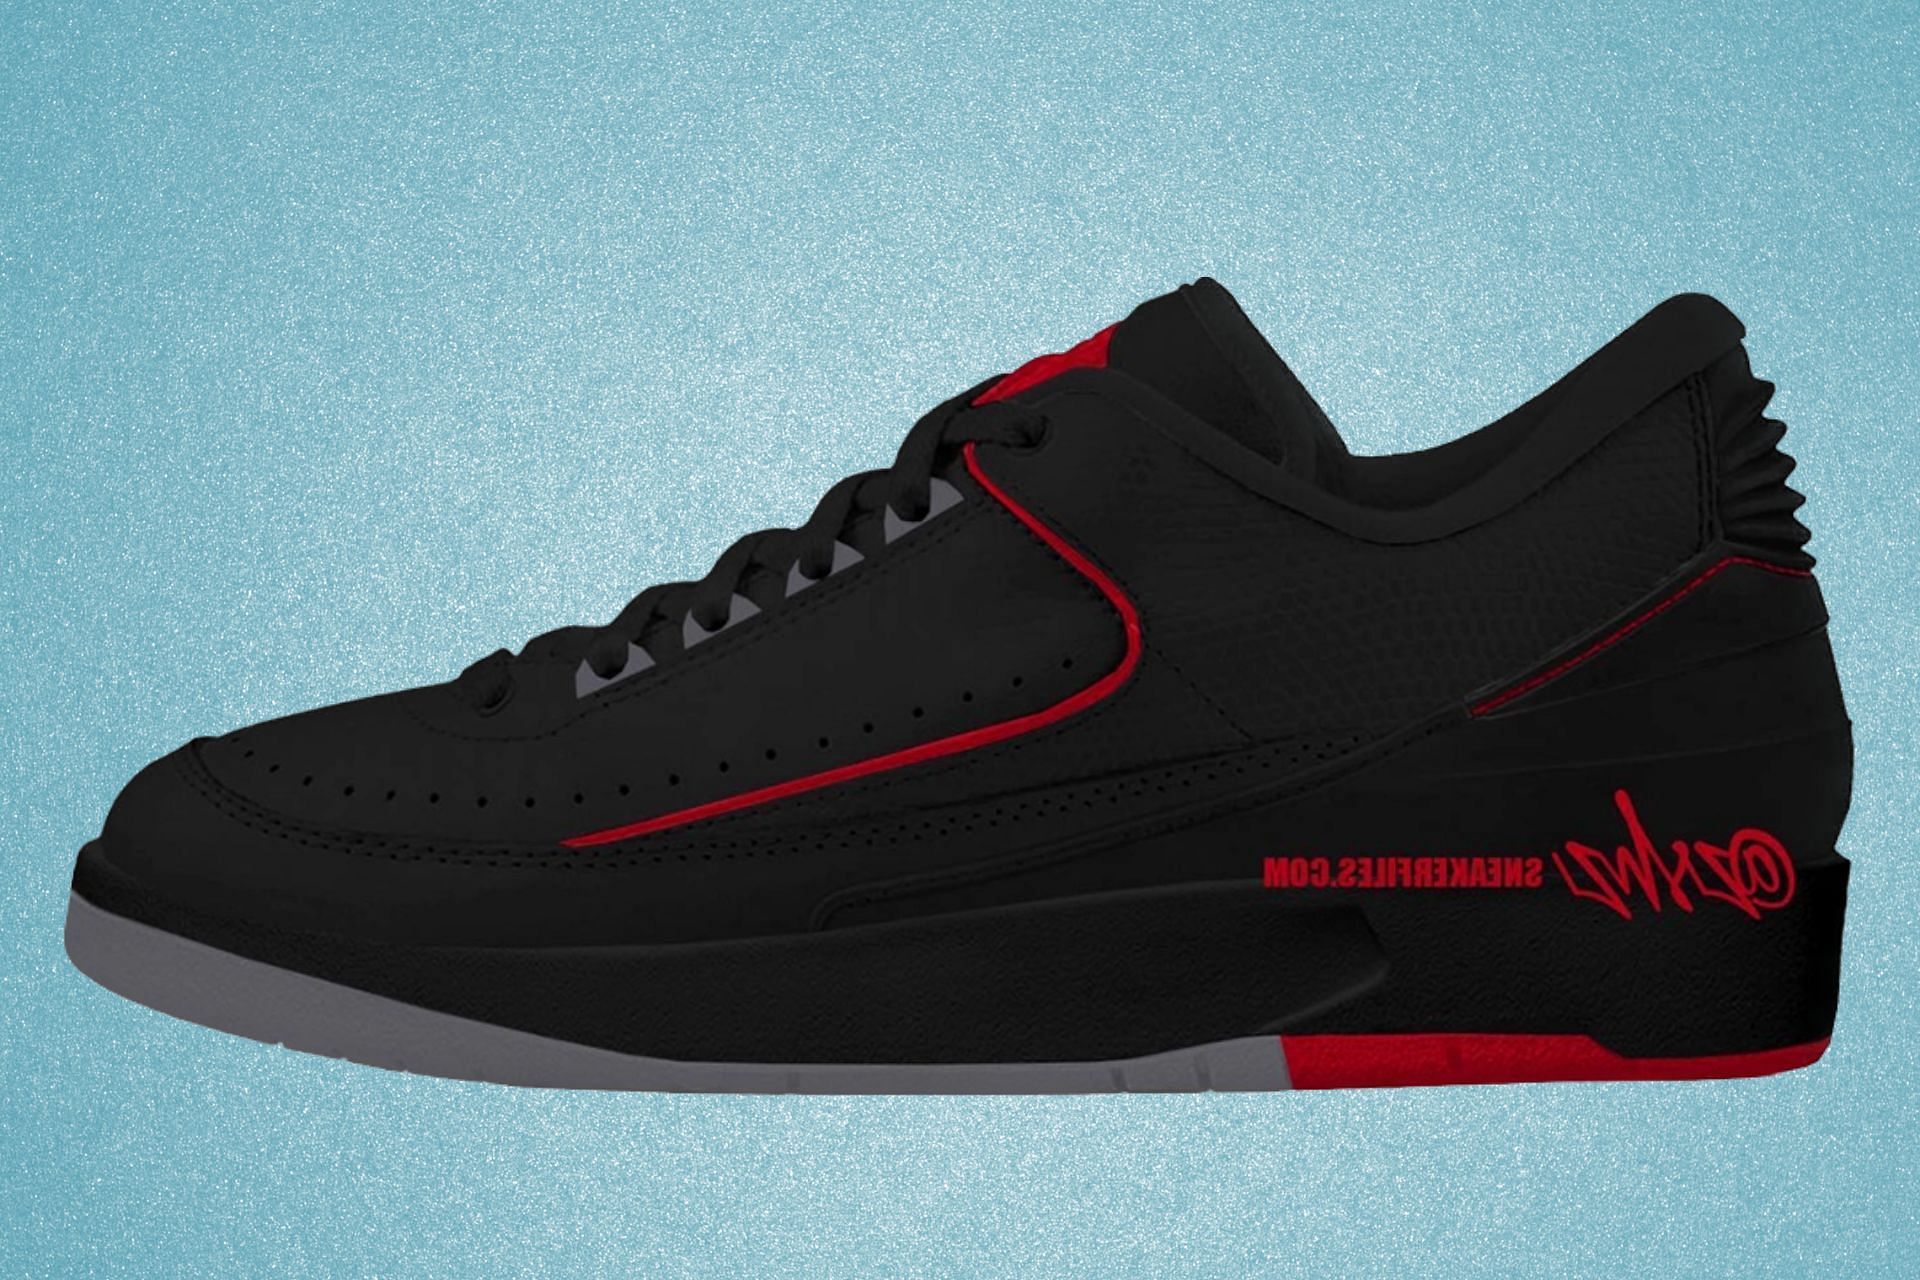 Here&#039;s a closer look at the arriving AJ 2 Low Bred shoes mockup (Image via Instagram/@zneakerheadz)